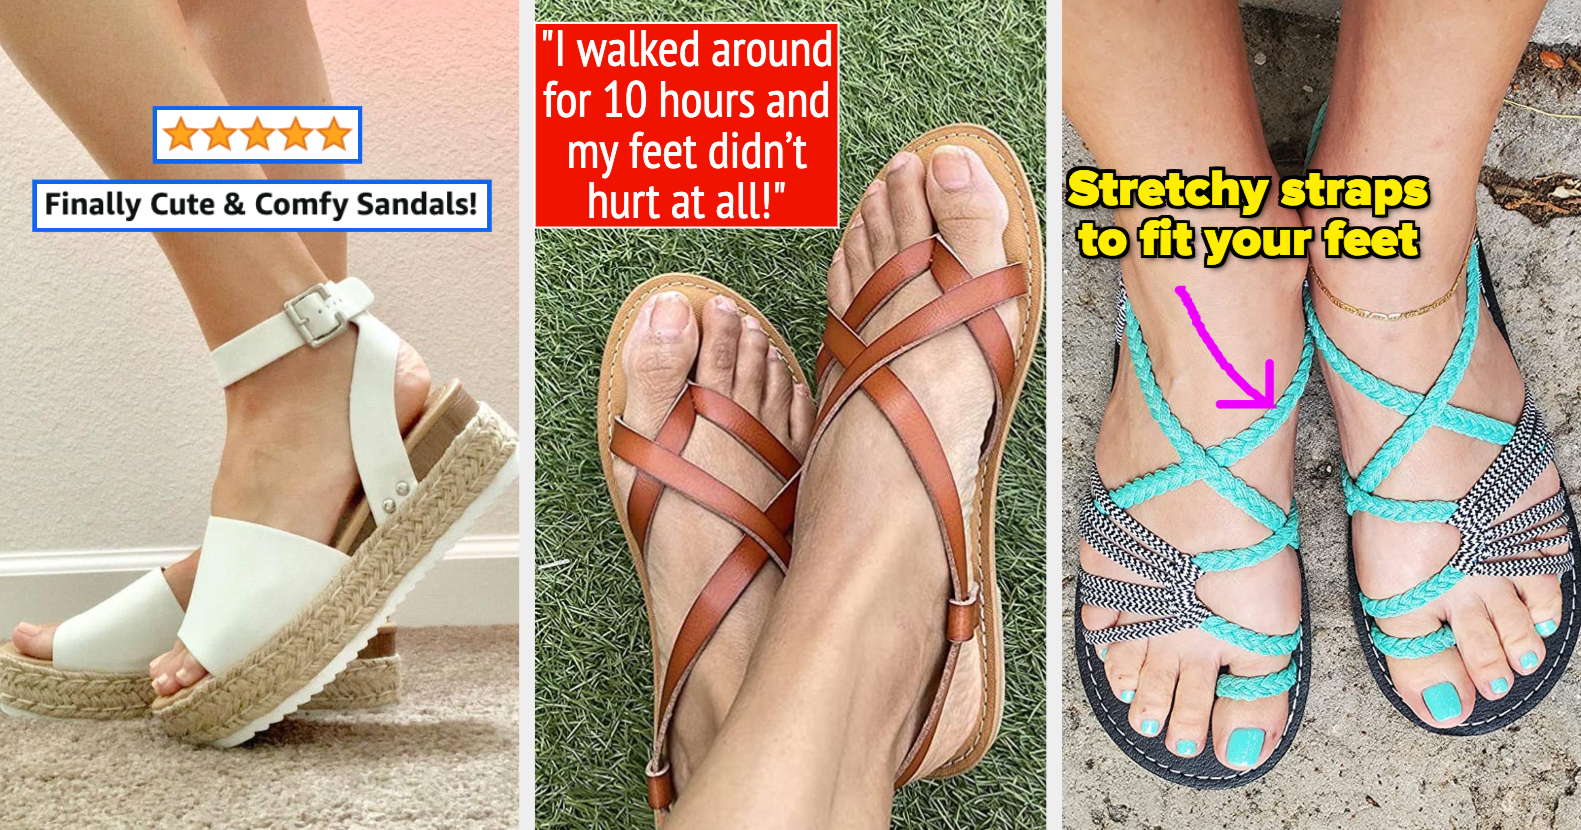 The 10 Best Barefoot Sandals for Hiking, Running, & Walking | Anya's Reviews